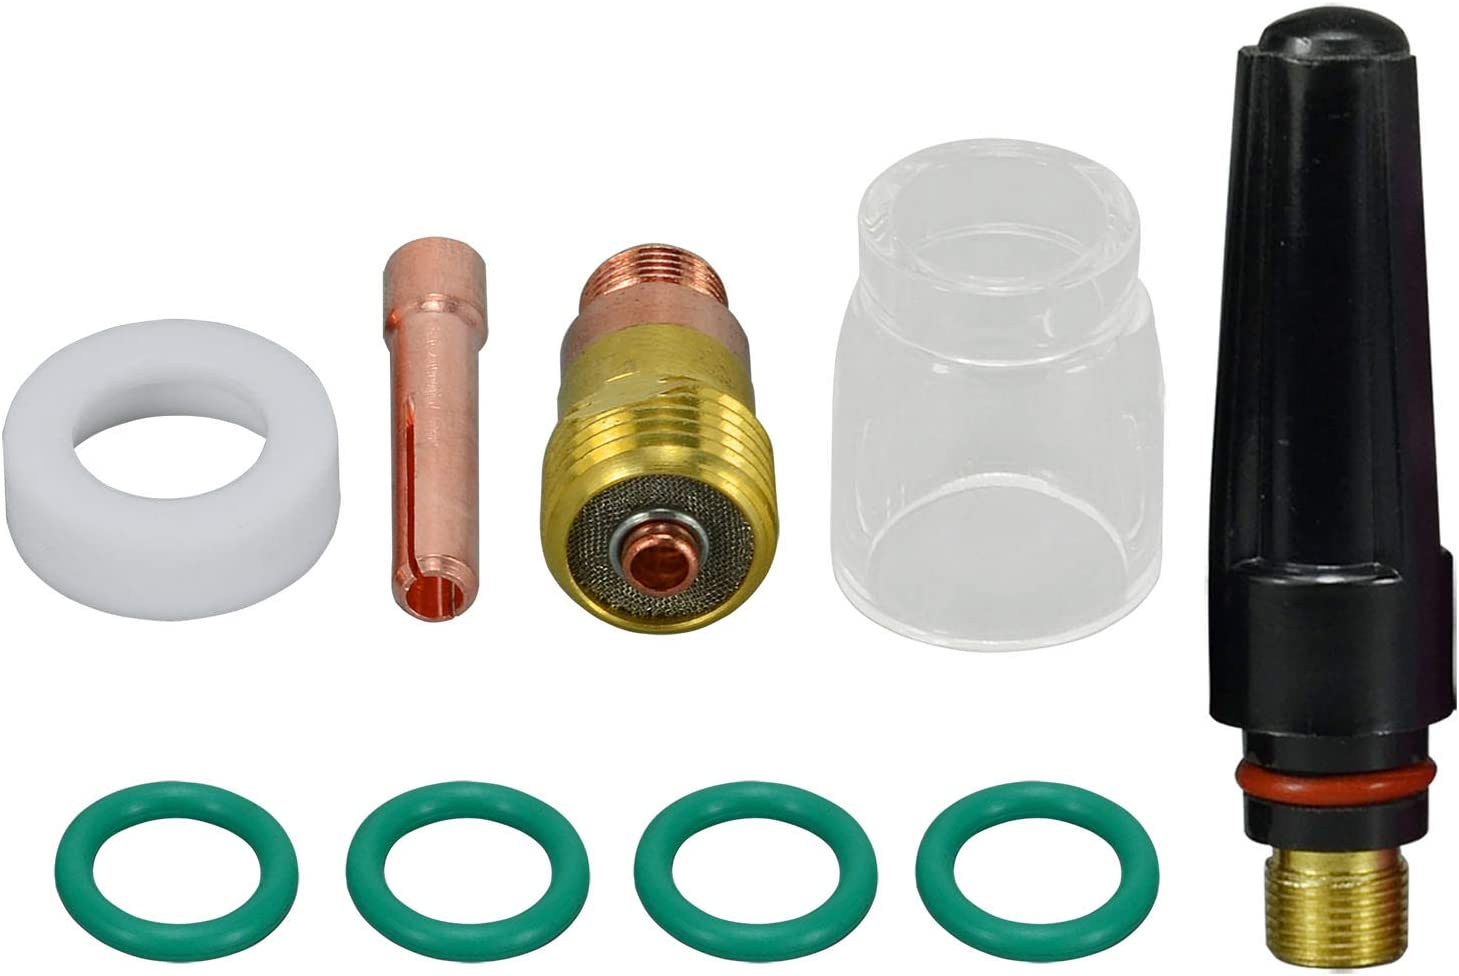 TIG Stubby Gas Lens Collet Body 17GL332 10N24S Insulated Cup #8TIG Gas lens insulator 17GLG20 TIG Back cap 57Y03 Assorted Kit for SR WP 17 18 26 TIG Welding Torch 9pcs (17GL18 10N25S, 1/8" & 3.2mm)